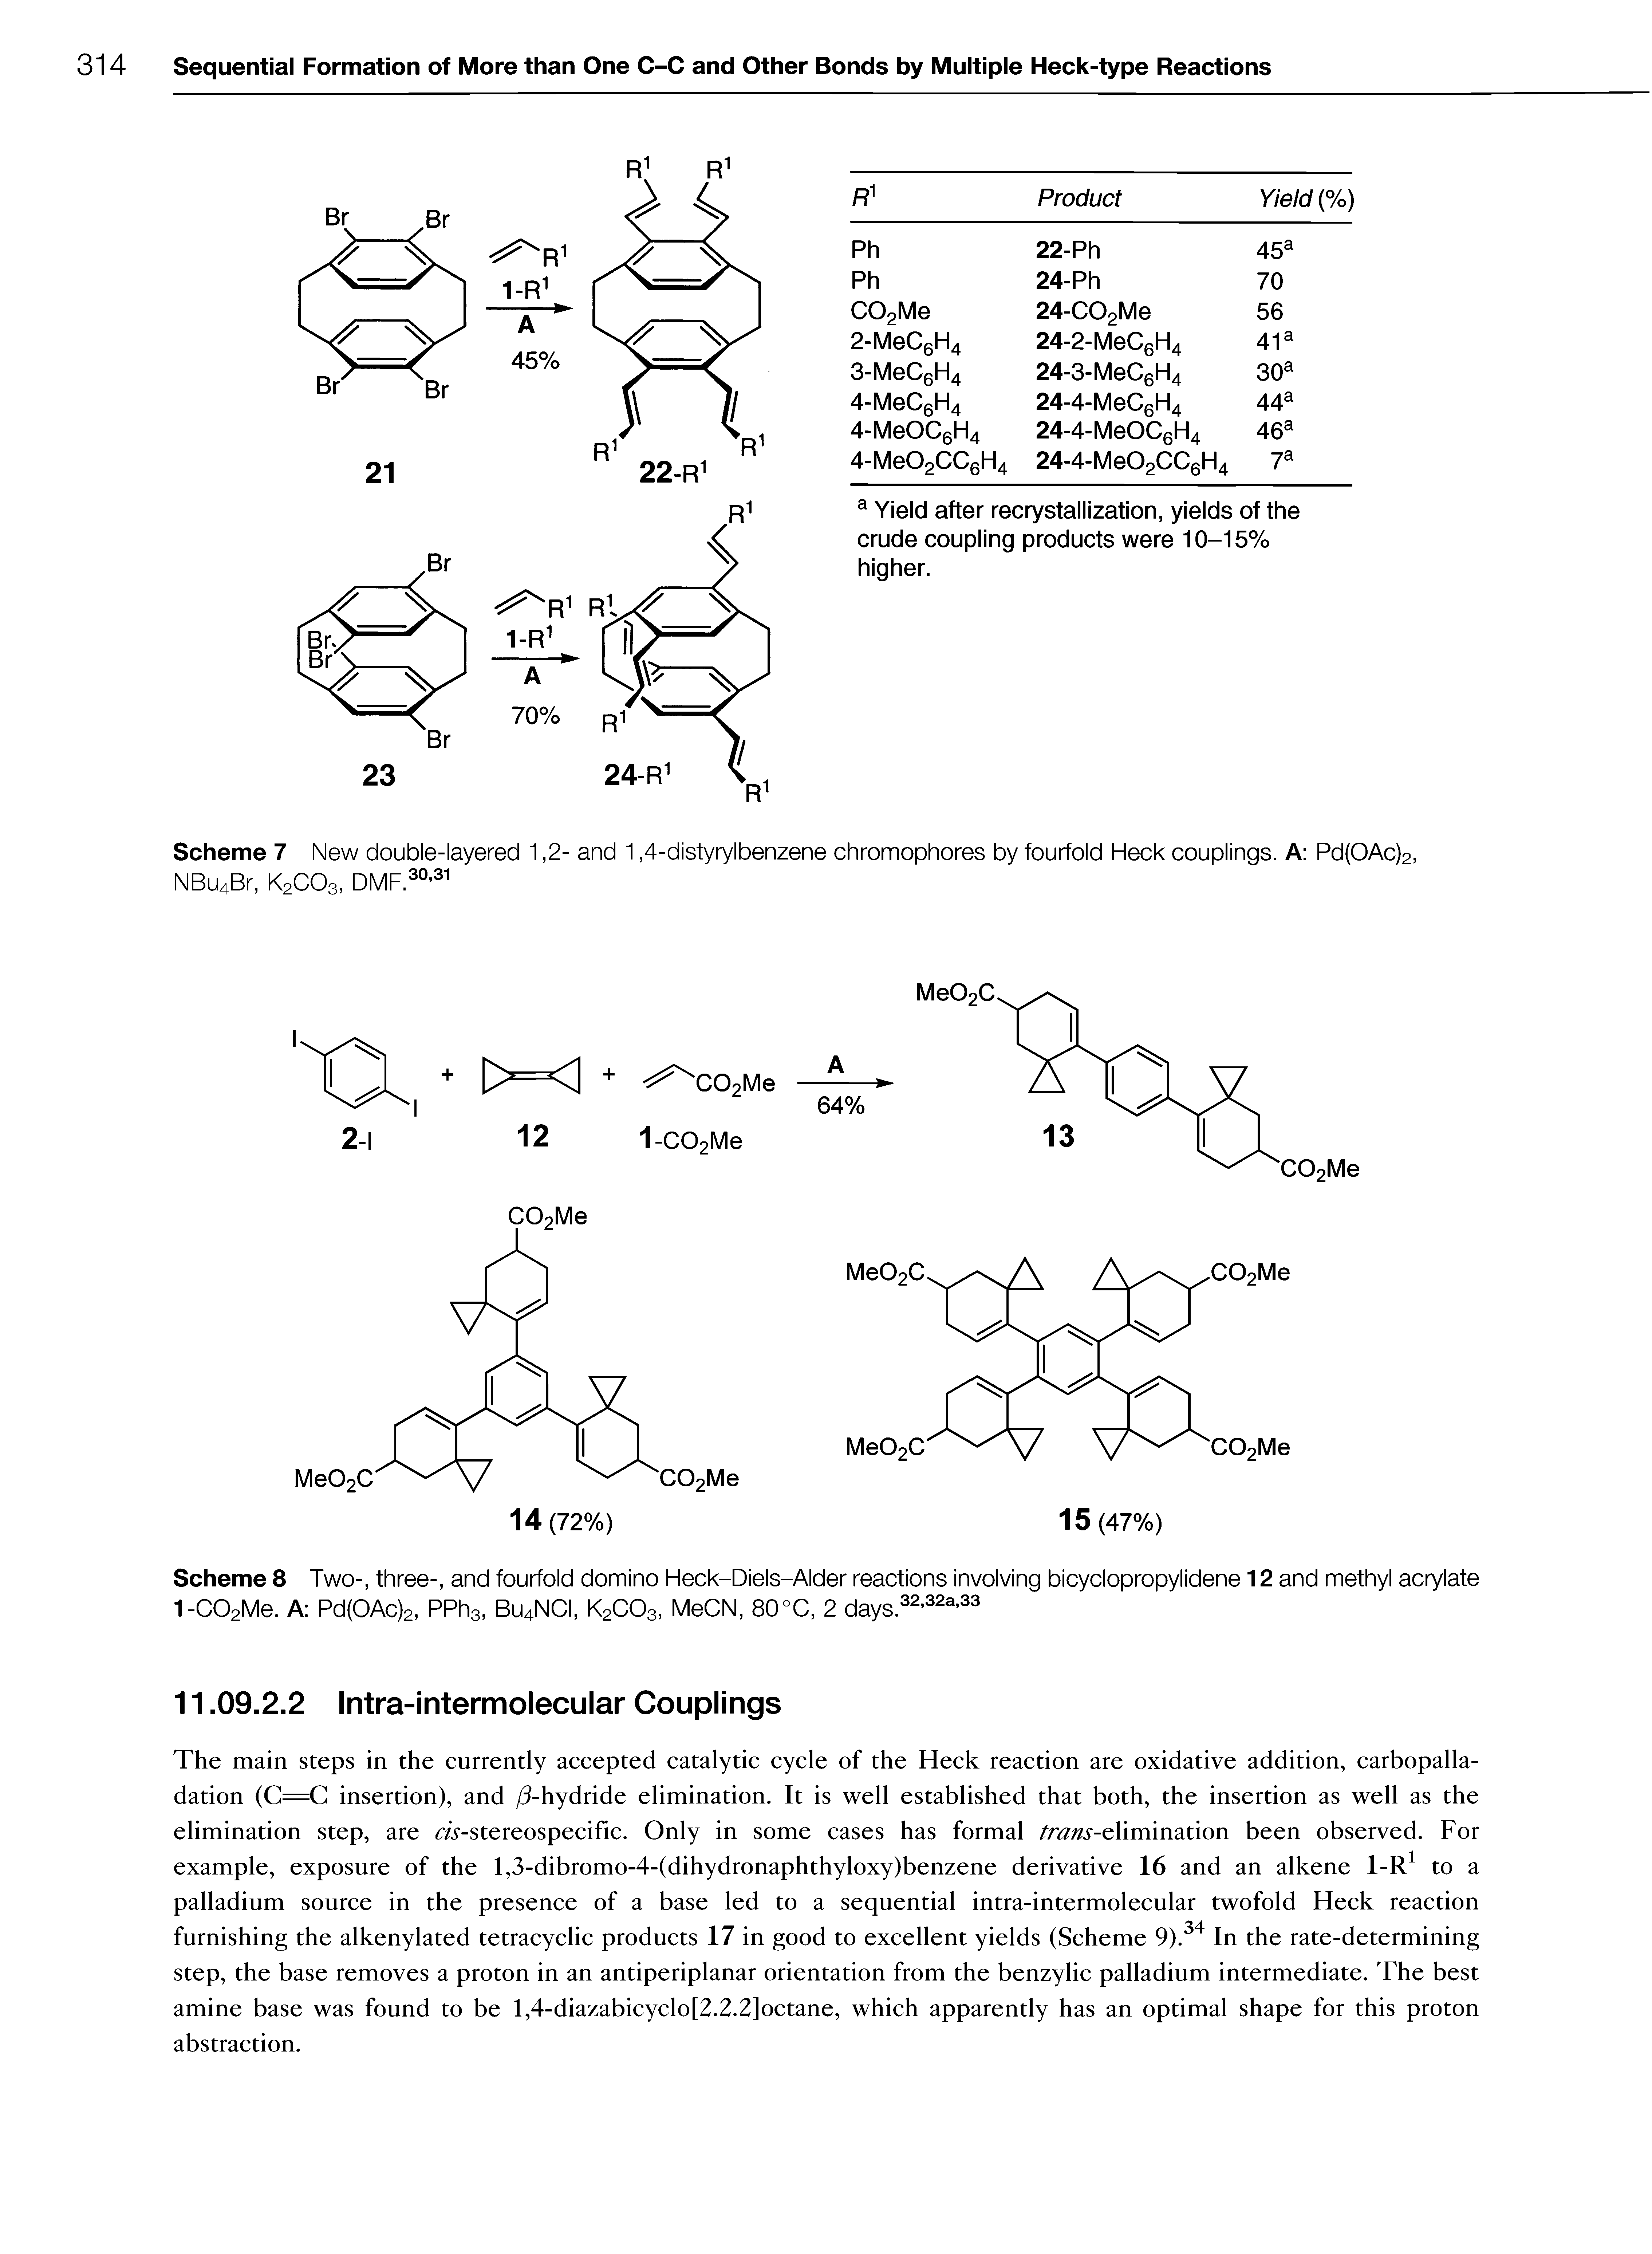 Scheme 8 Two-, three-, and fourfold donnino Heck-Diels-Alder reactions involving bicyclopropylidene 12 and nnethyl acrylate 1-C02Me. A Pd(OAc)2, PPhs, BU4NCI, K2CO3, MeCN, 80°C, 2 days. ...